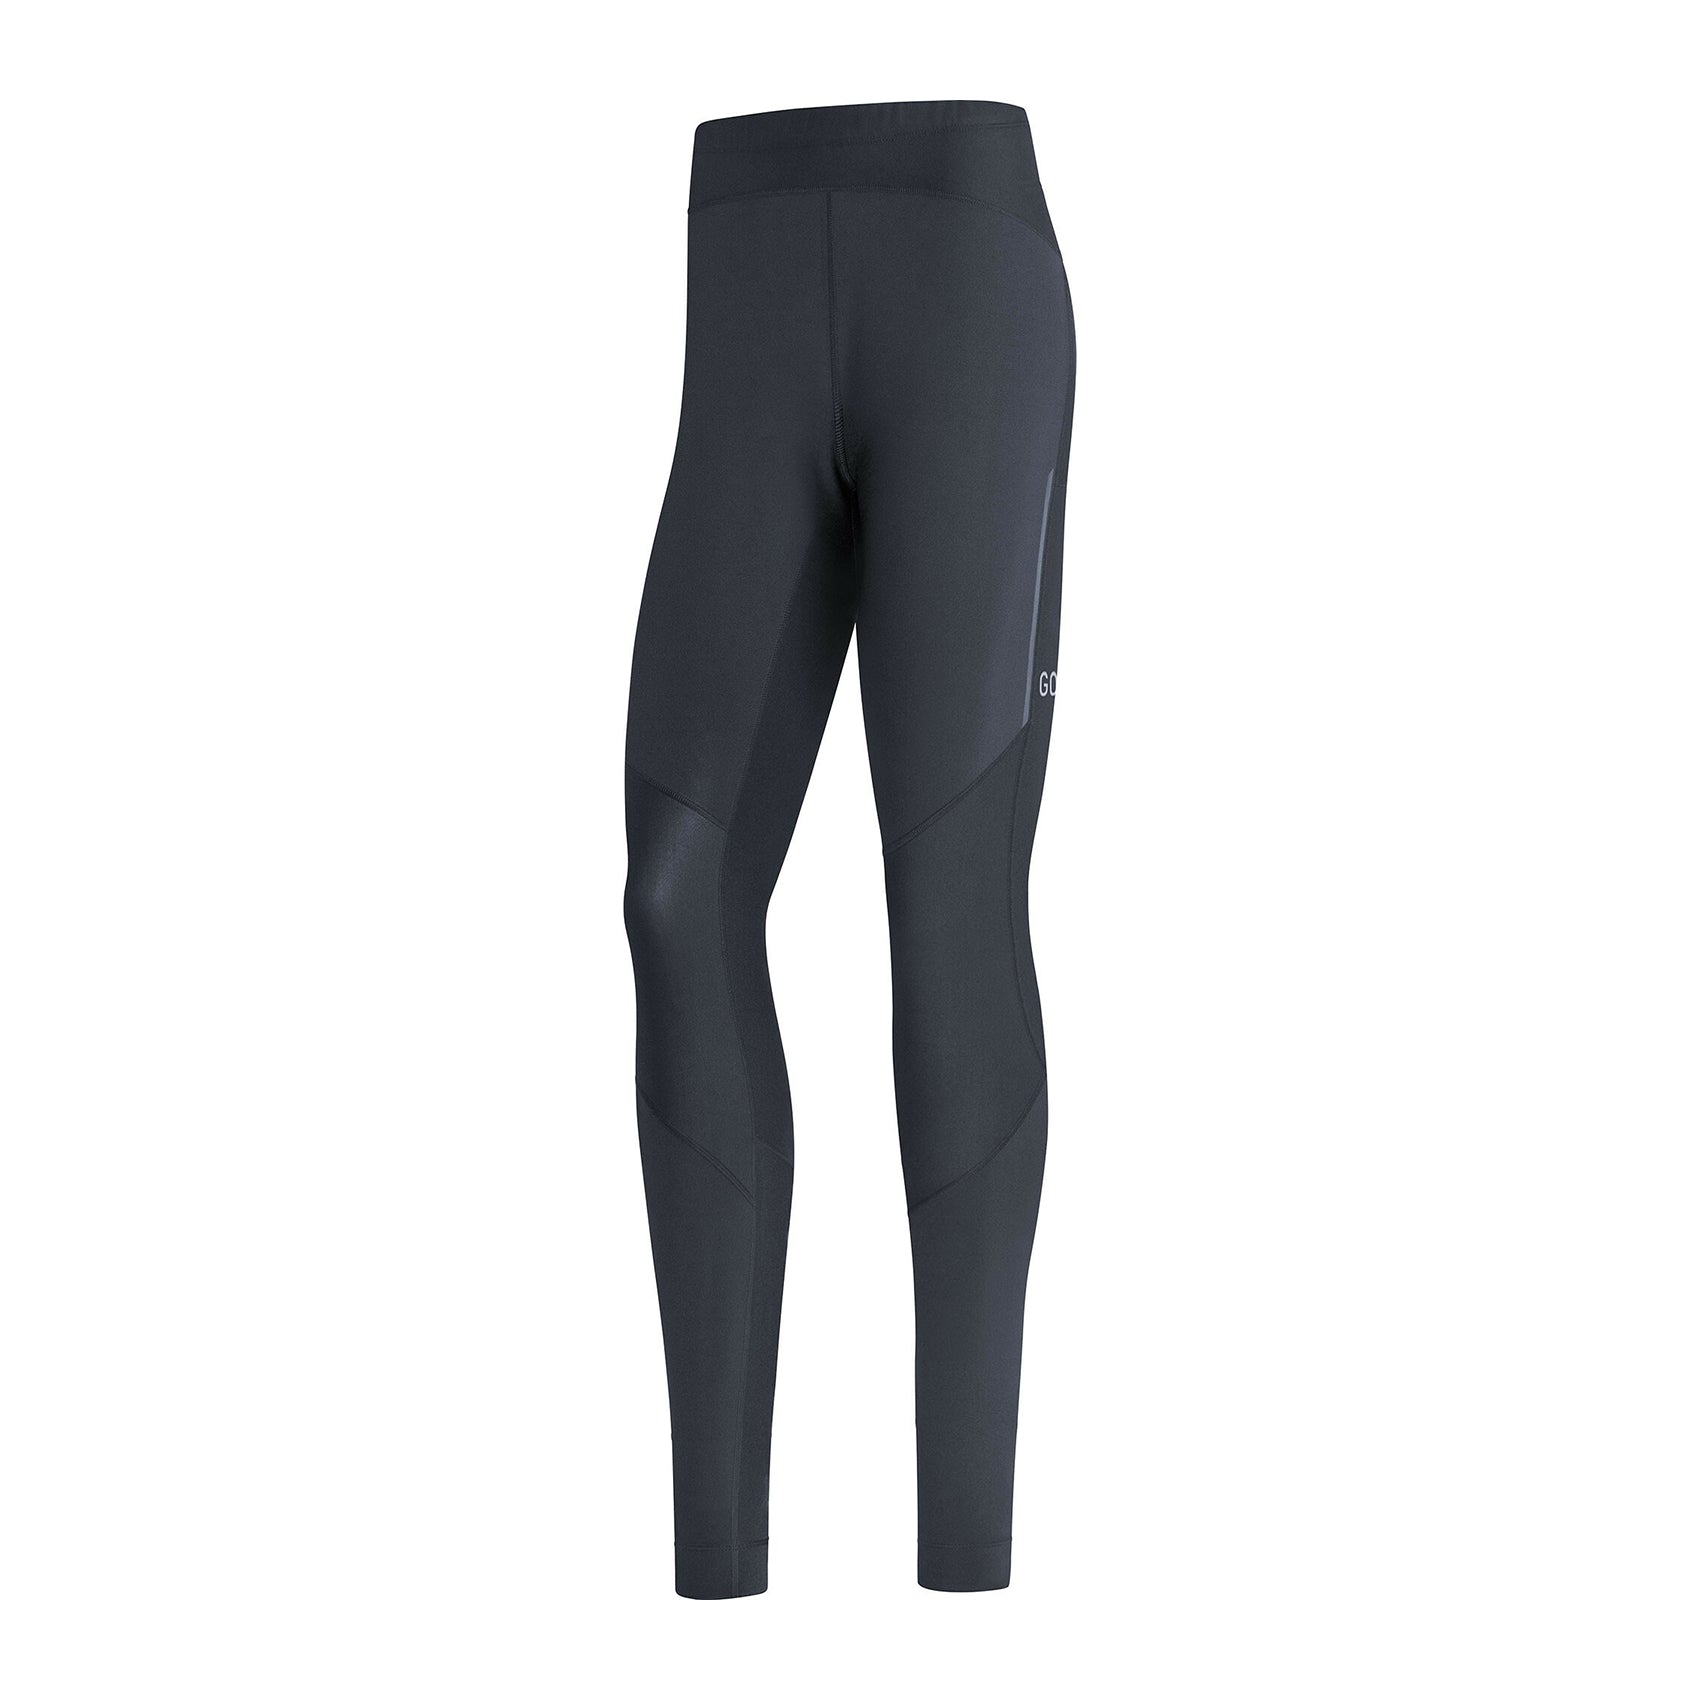 GORE Wear R3 Partial Gore Windstopper Tights - Running trousers